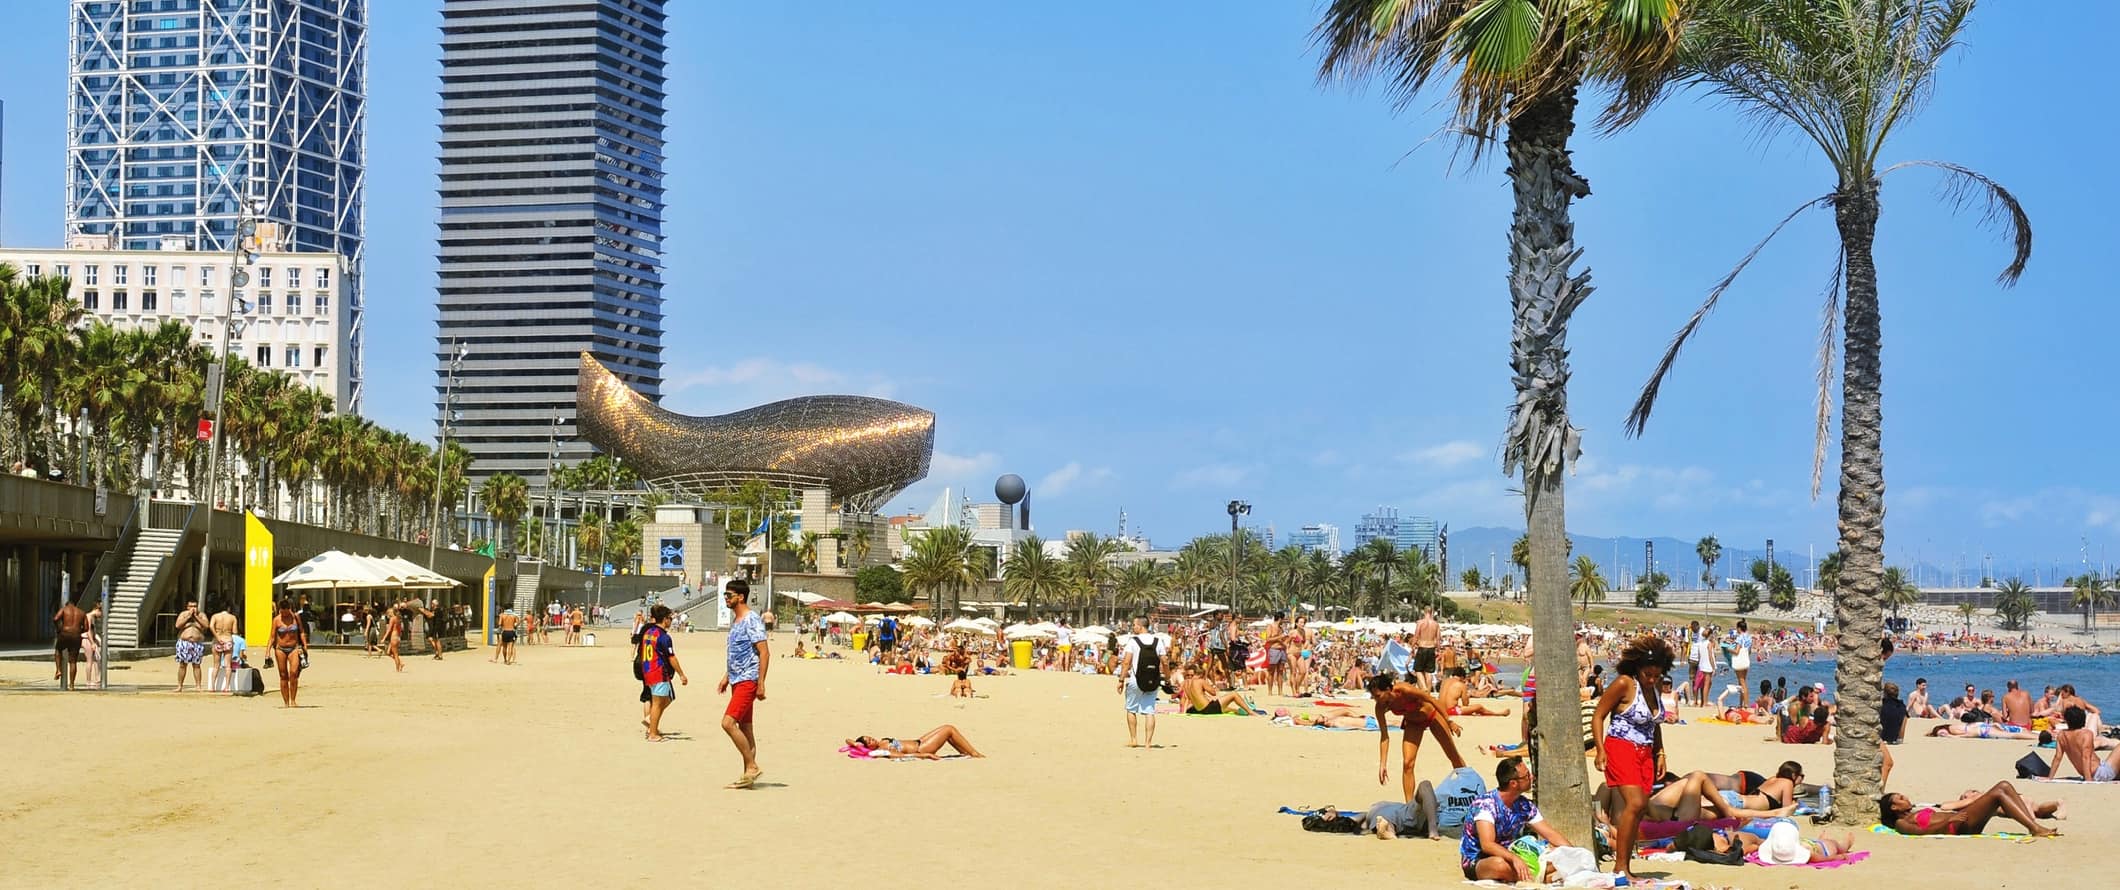 People relaxing on the famous Barcelona beach in Barcelona, Spain in the summer